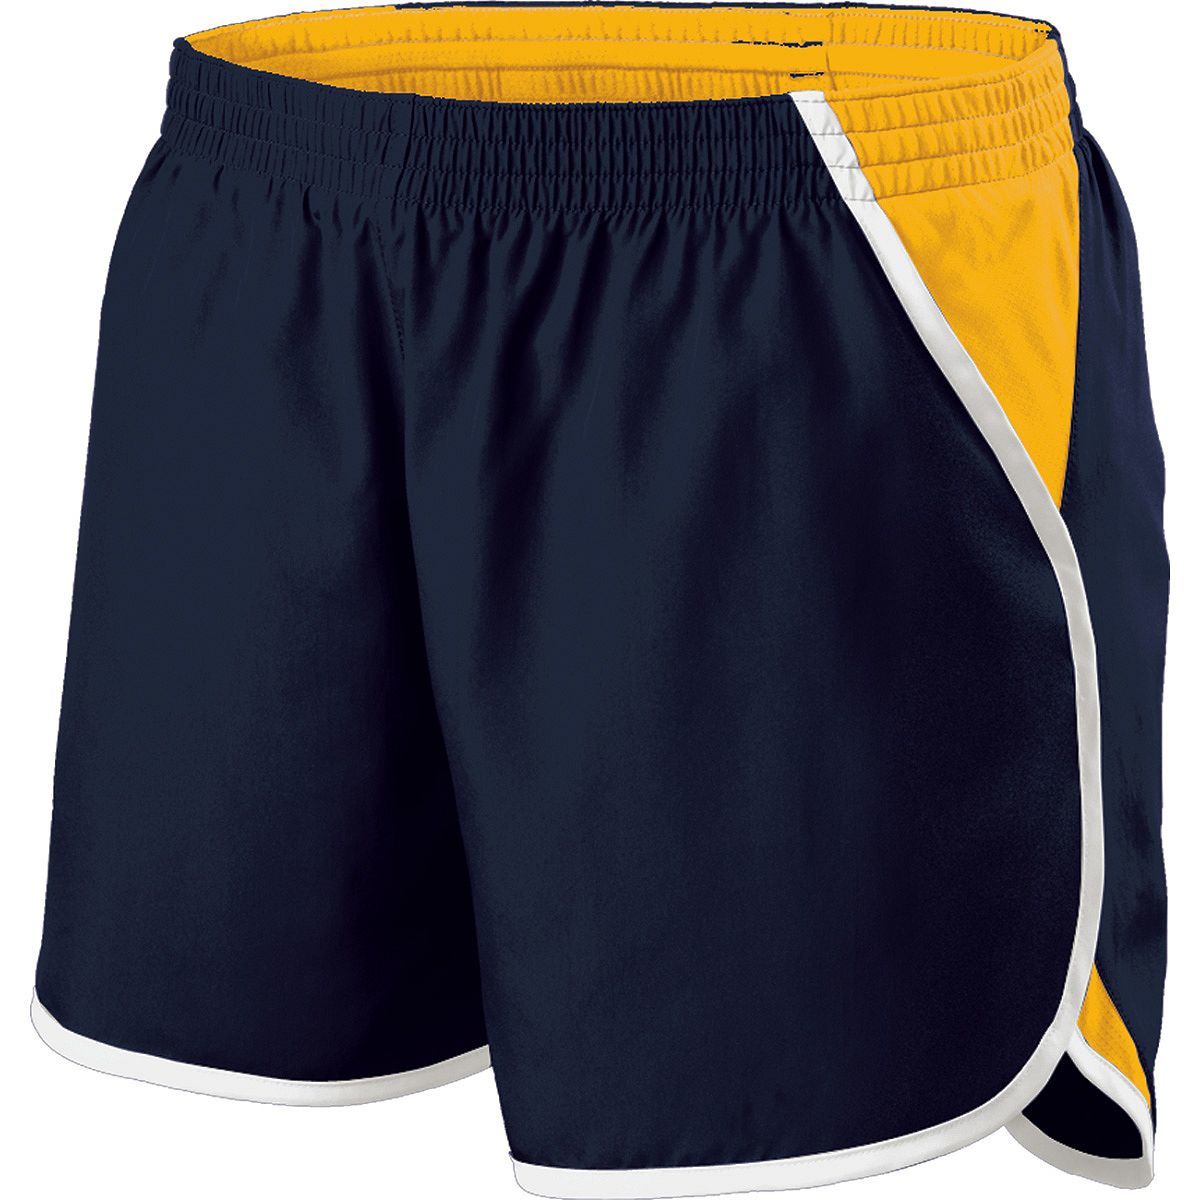 Holloway Energize Shorts in Navy/Light Gold/White  -Part of the Ladies, Ladies-Shorts, Holloway product lines at KanaleyCreations.com